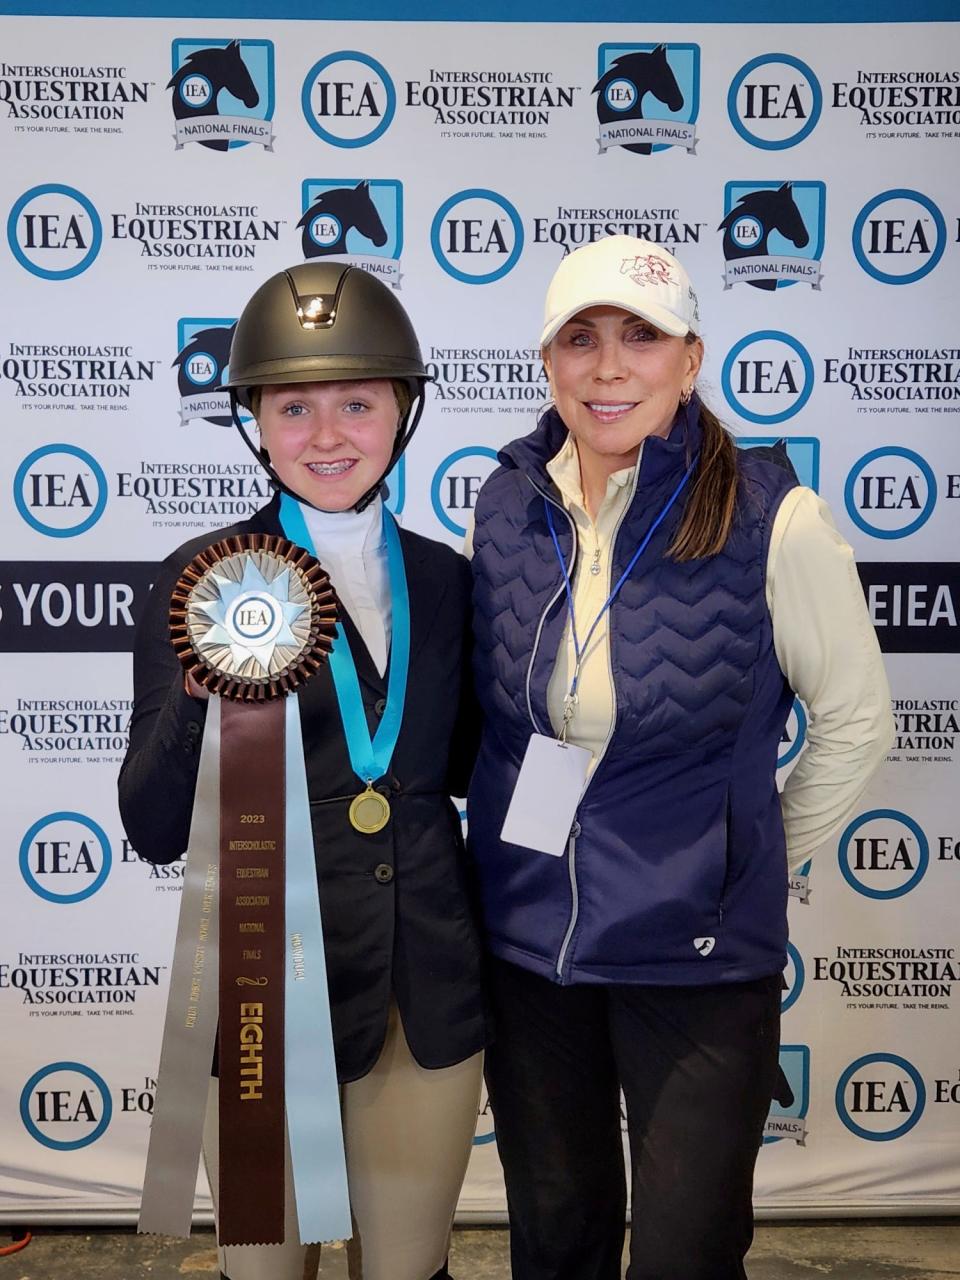 Pictured is Emma Abbott, left, with Donna Rothman, IEA team coach and owner of Stonehaven Farms in Temperance. Abbott competed at Hunt Seat National Finals in Tryon, N.C., and placed eighth in the nation in the individual novice division.